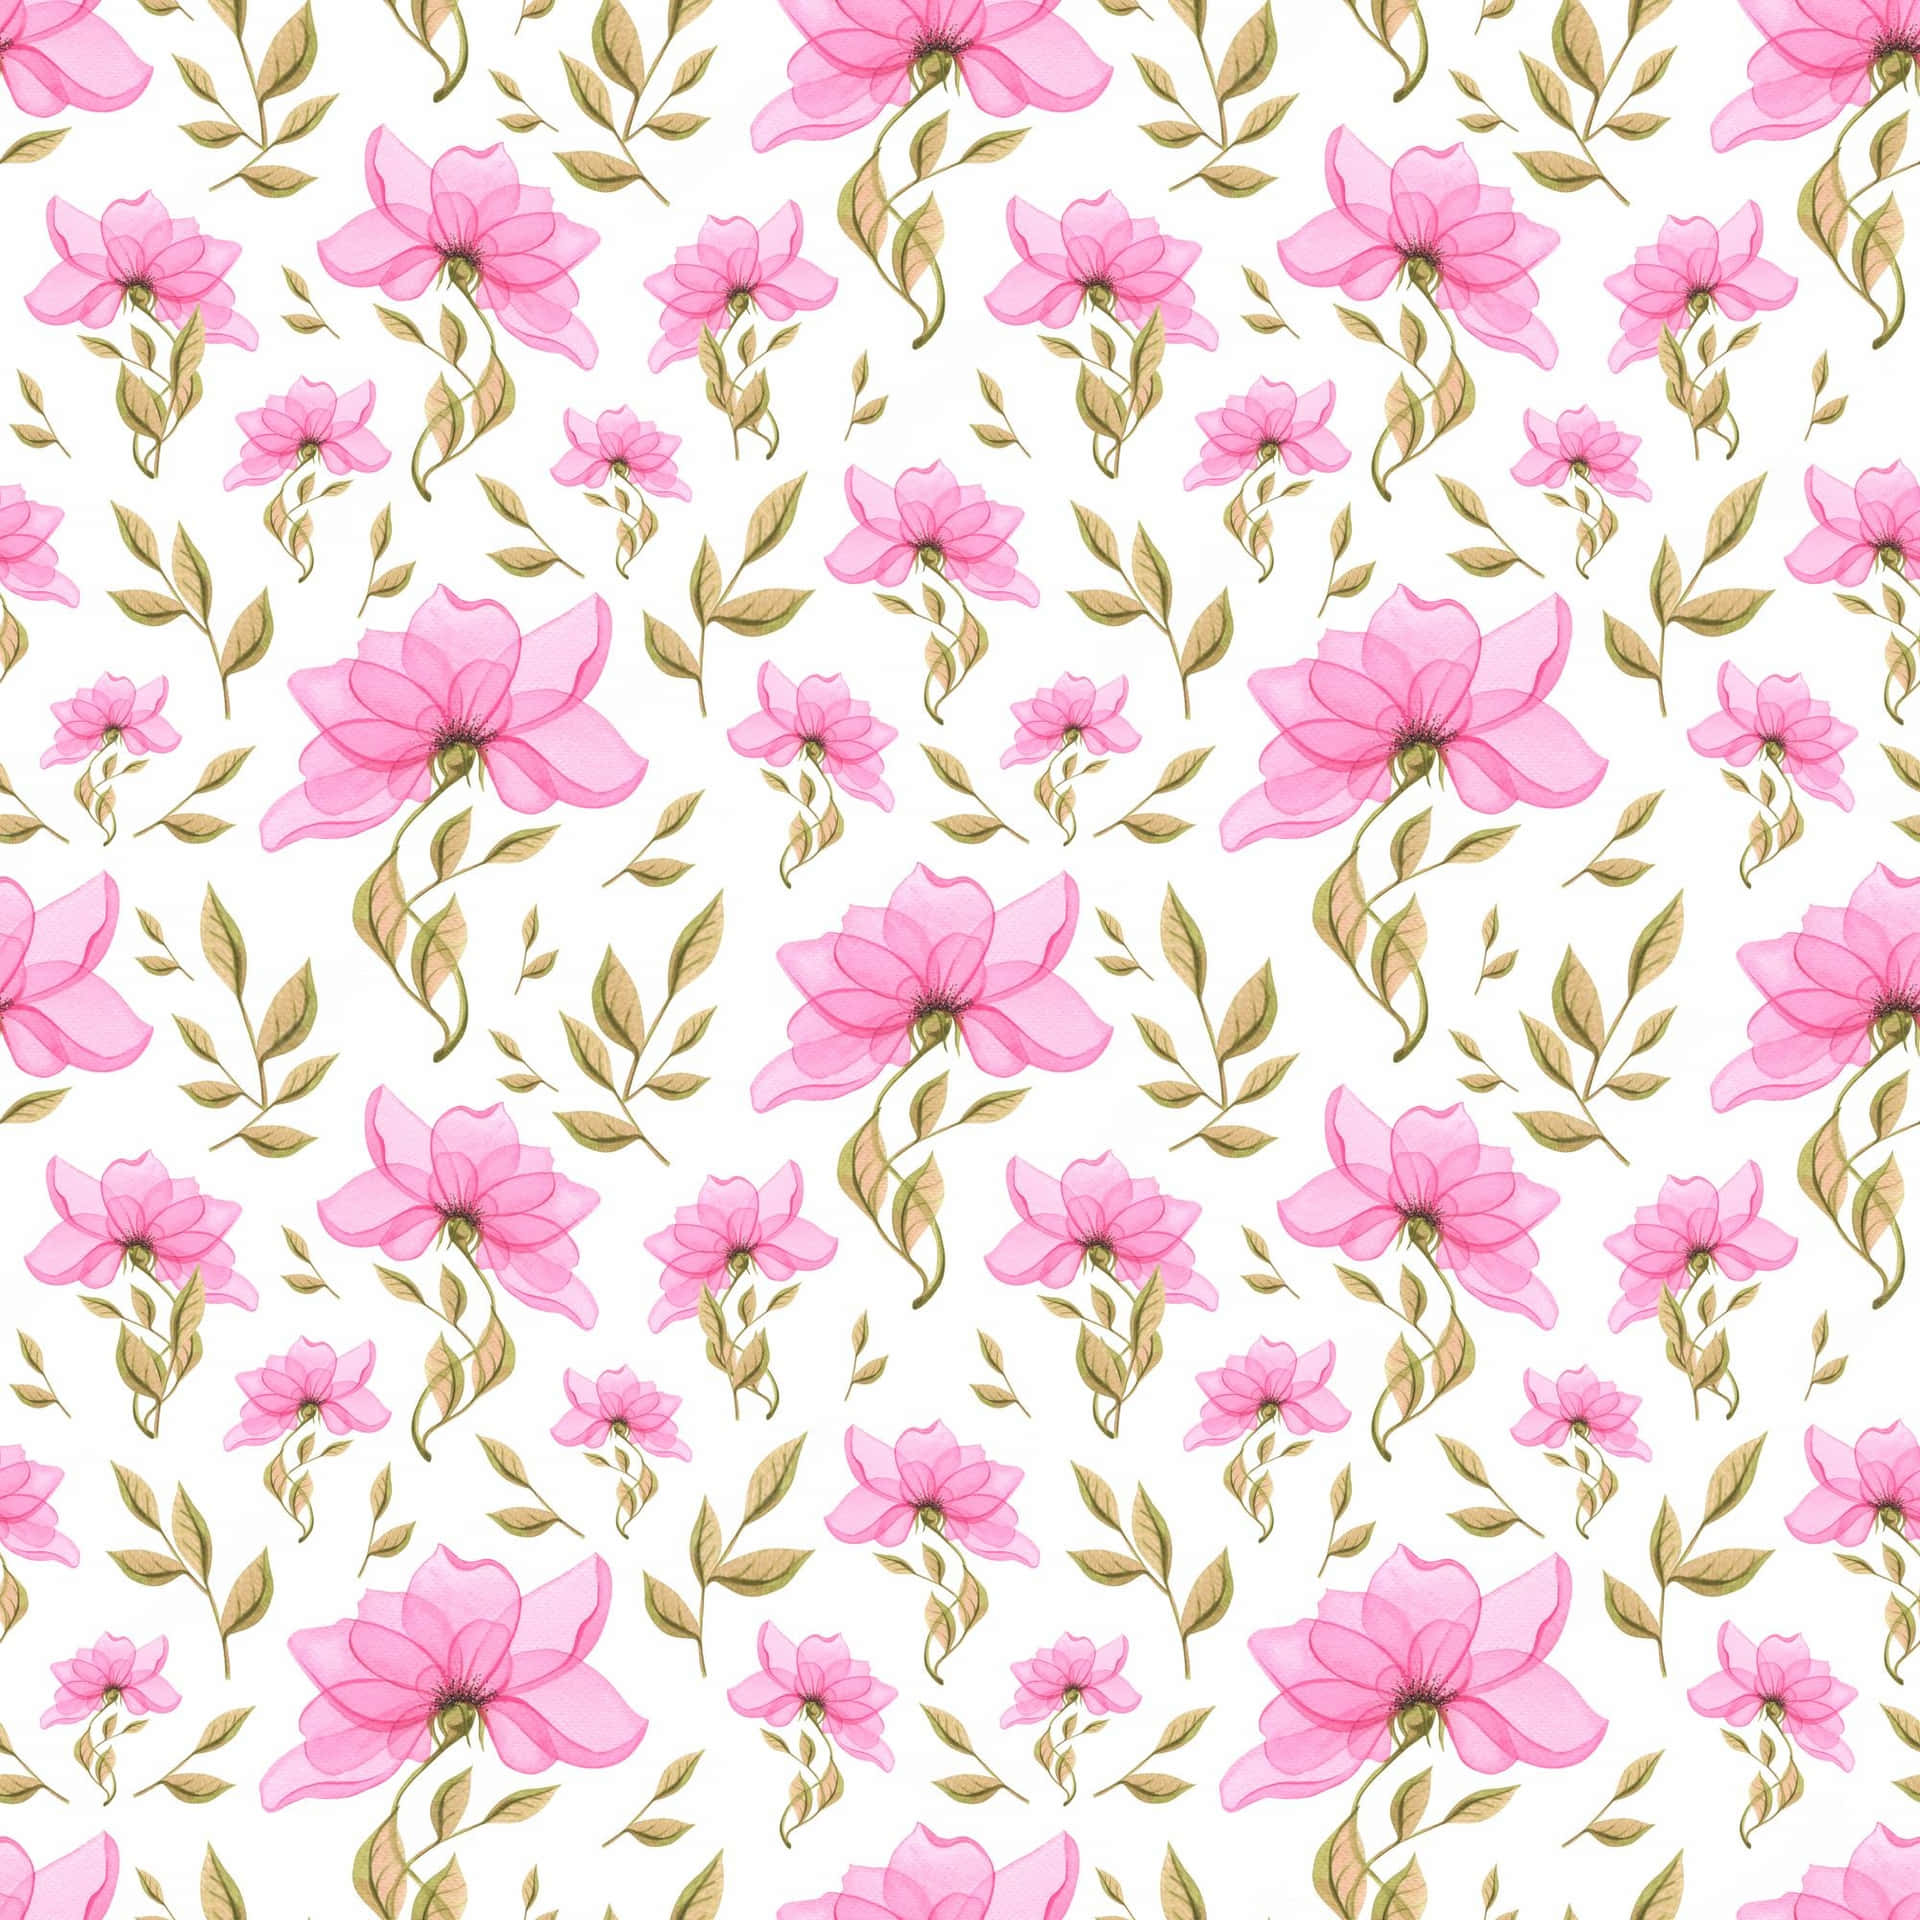 "Springtime In The City" Wallpaper